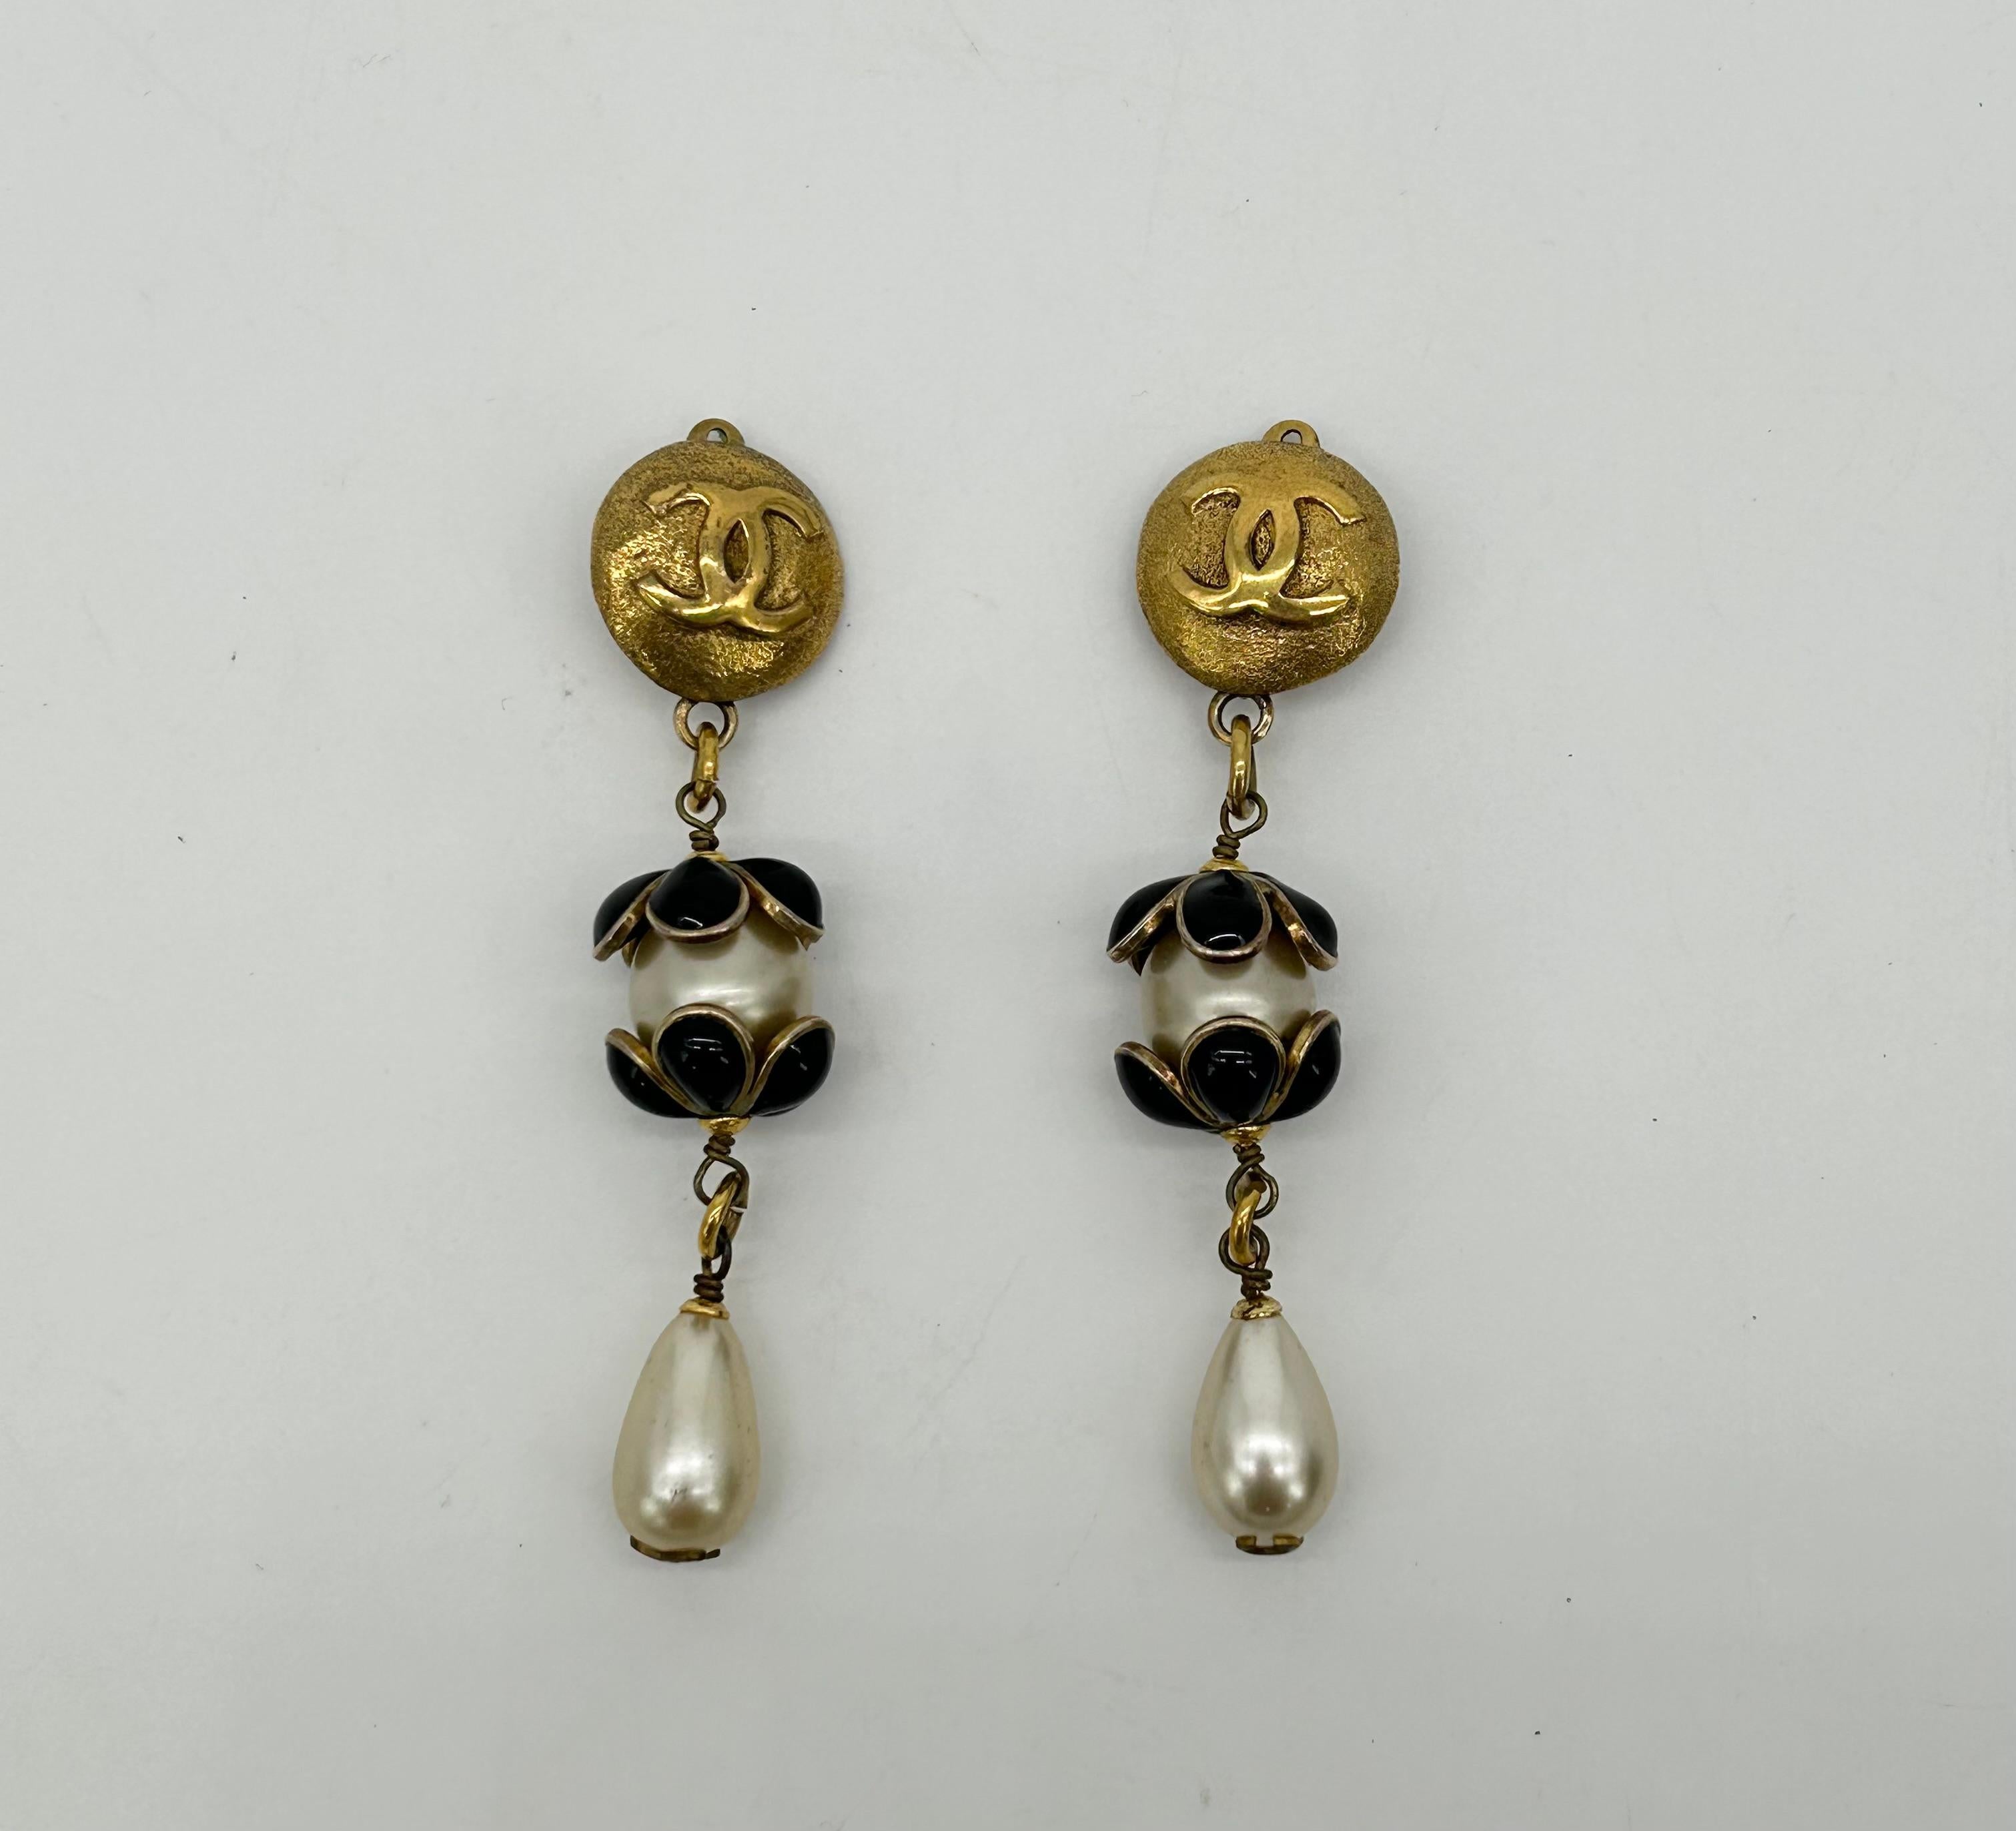 Chanel Gold Enamel Pearl Teardrop Earrings In excellent condition. Three separate parts make up these gorgeous dangling design. Top part features gold round with CC Chanel logo embossed on front and clip on back. This is linked to the center portion